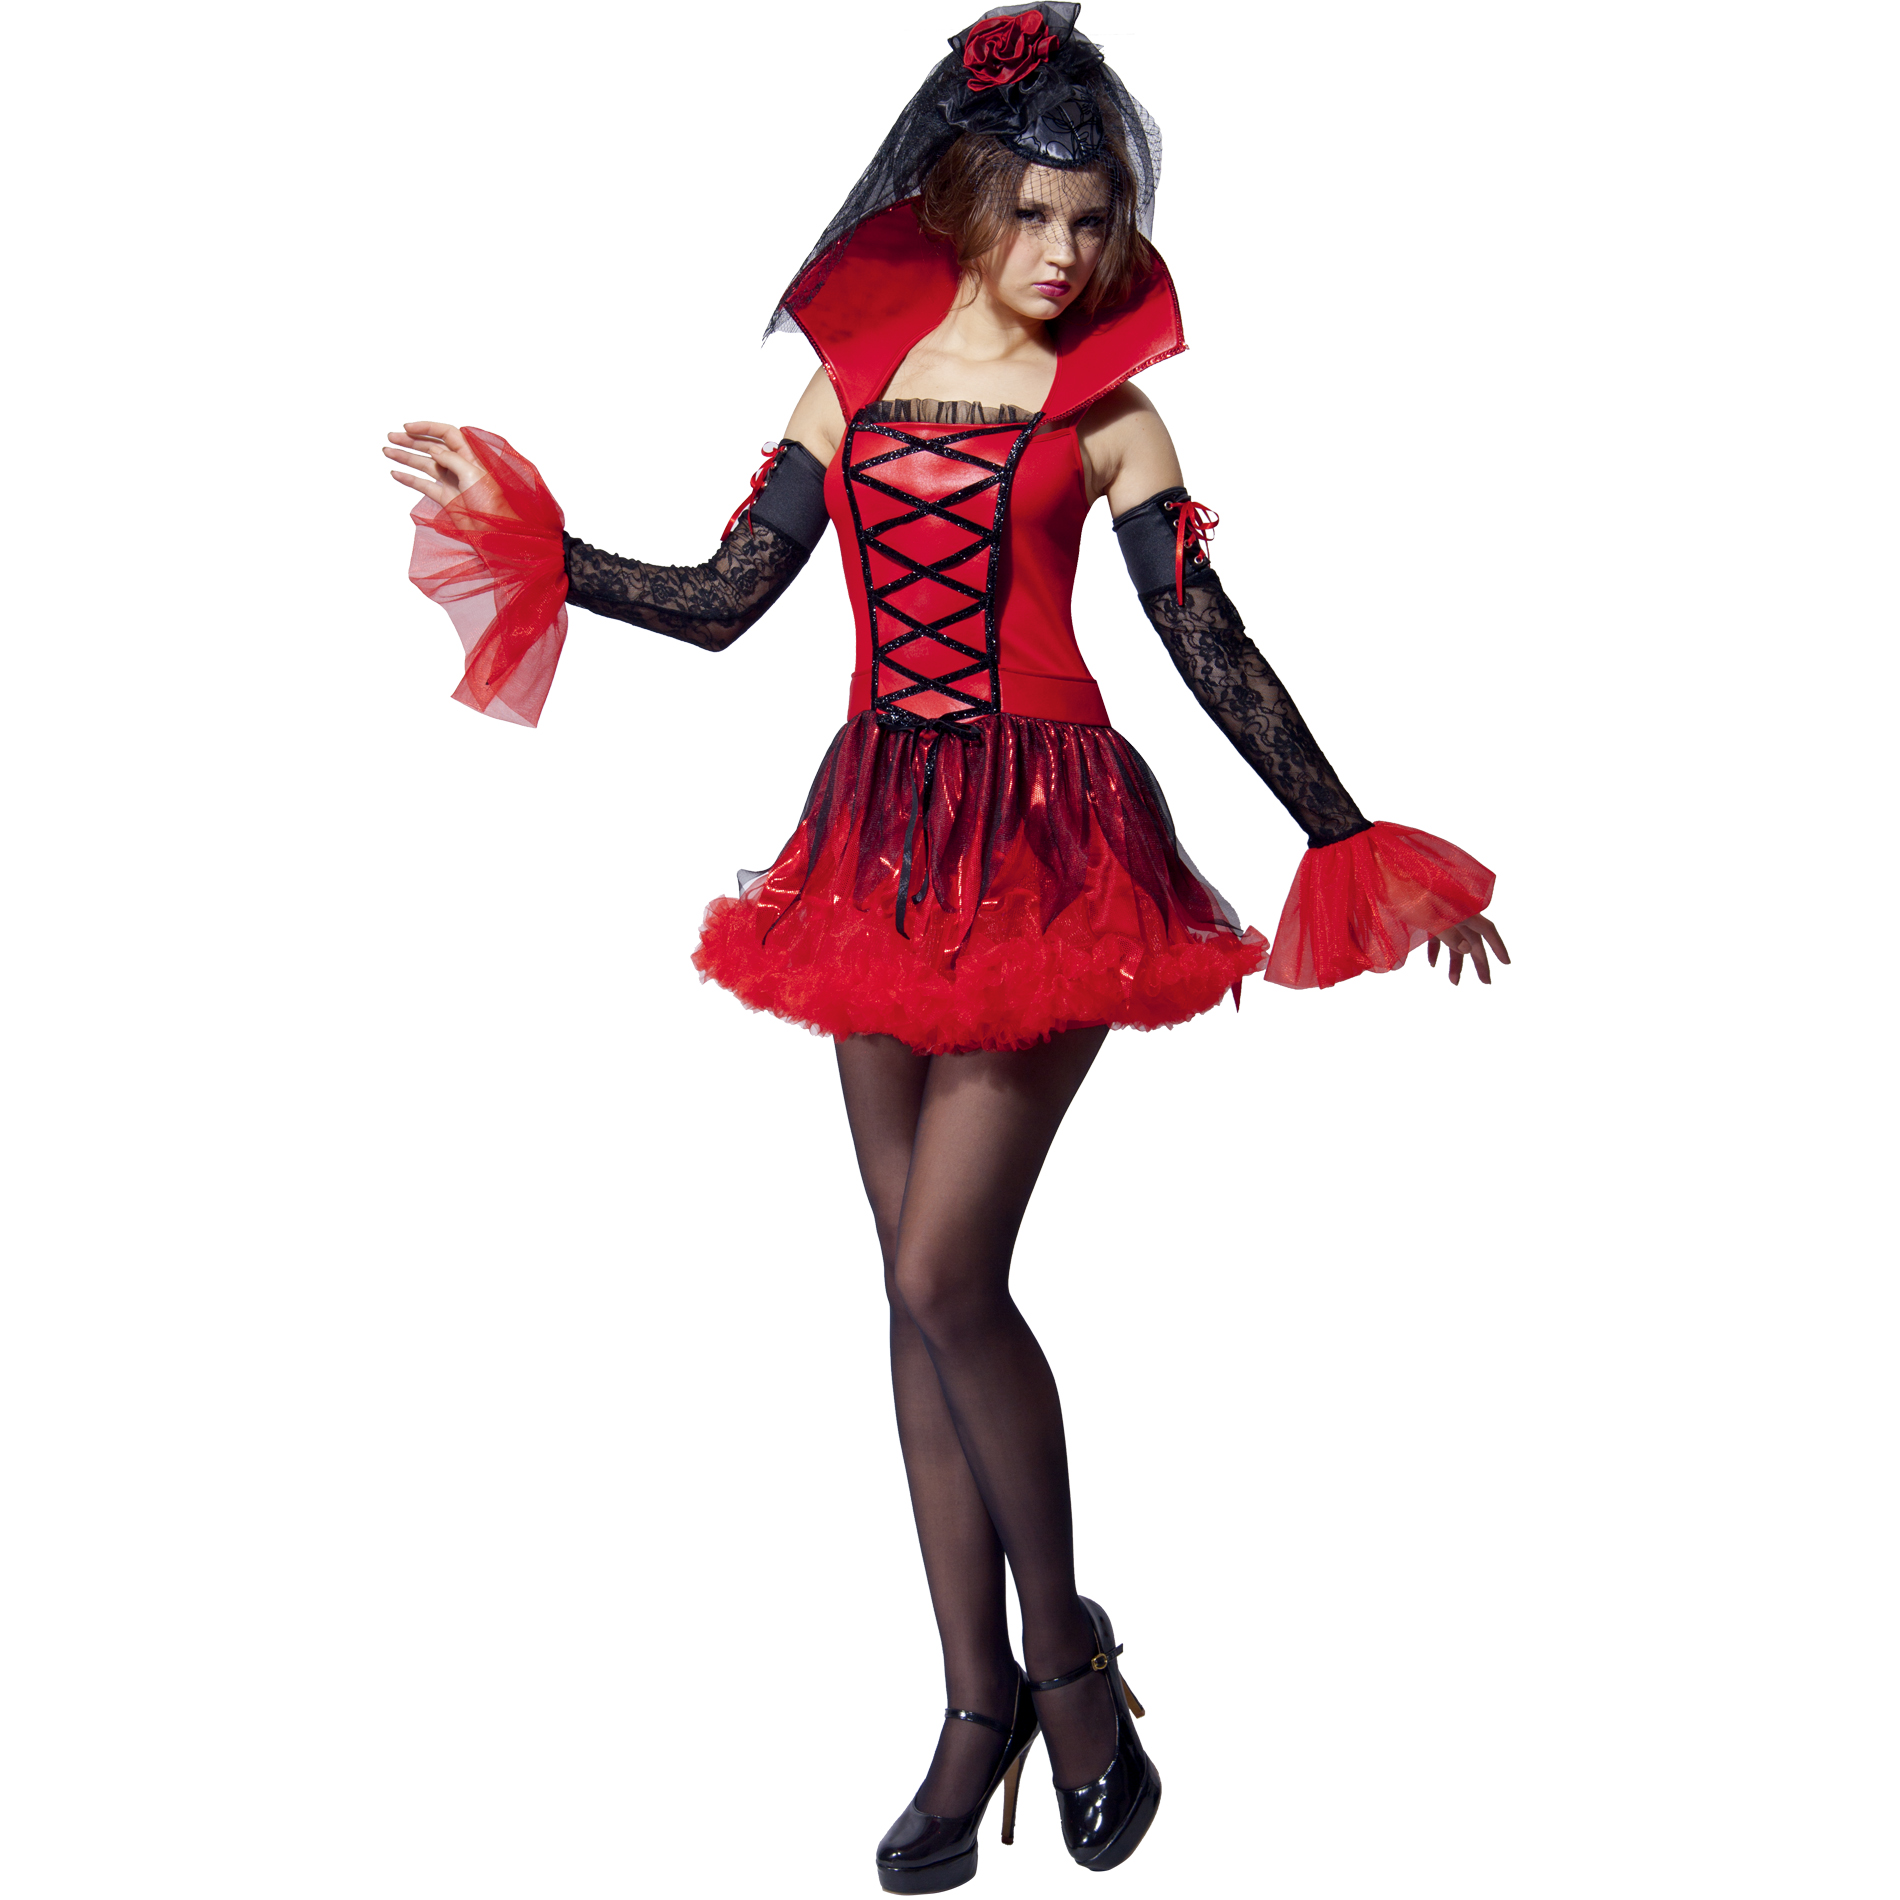 Totally Ghoul Red Tutu Dress Women's Halloween Costume